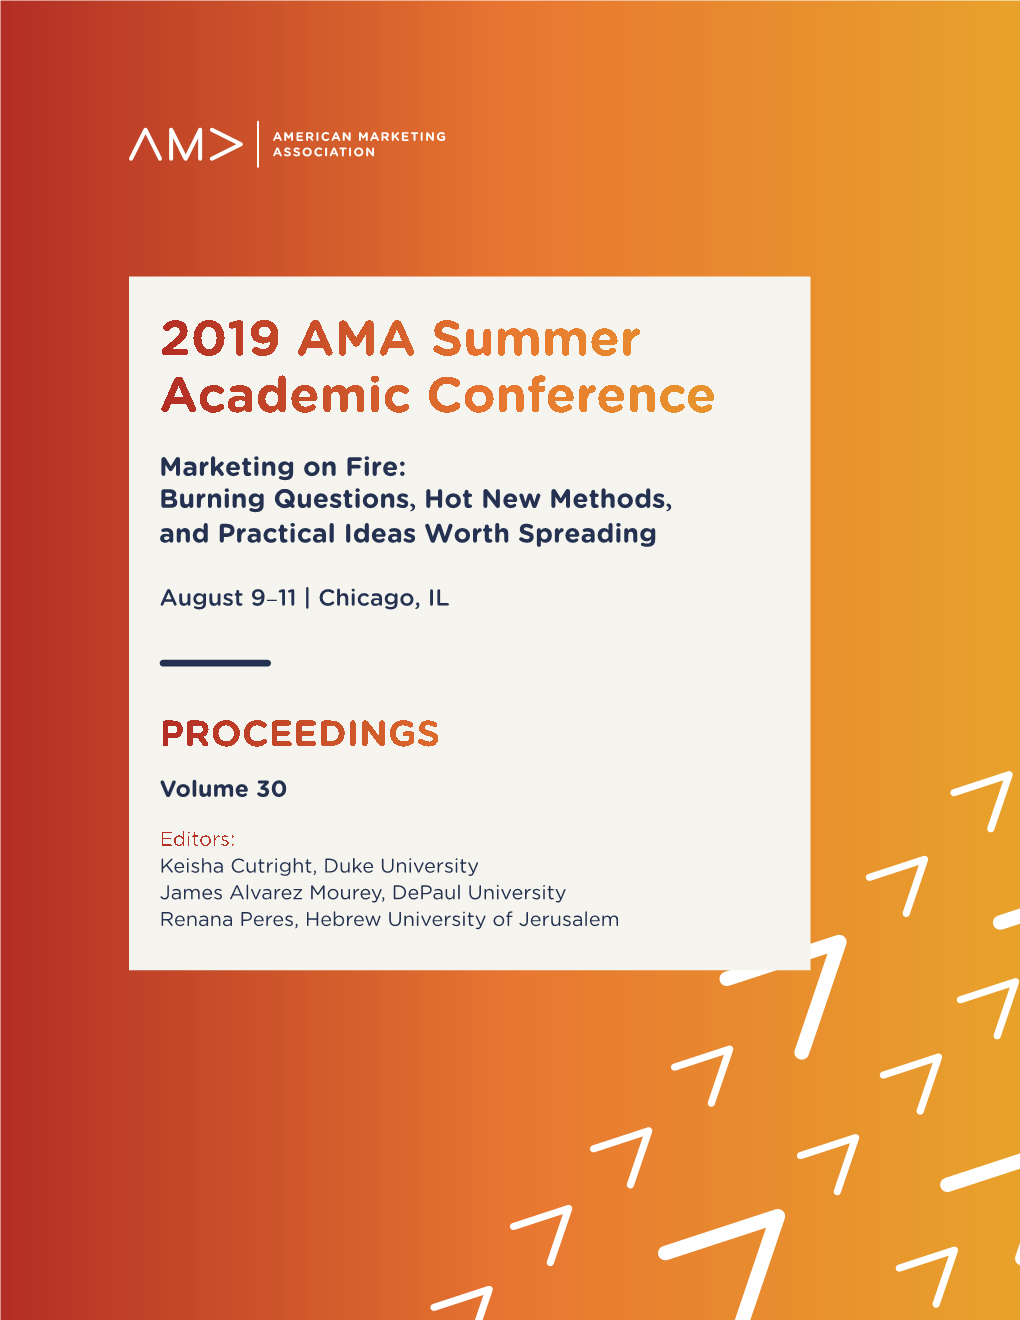 2019 AMA Summer Academic Conference